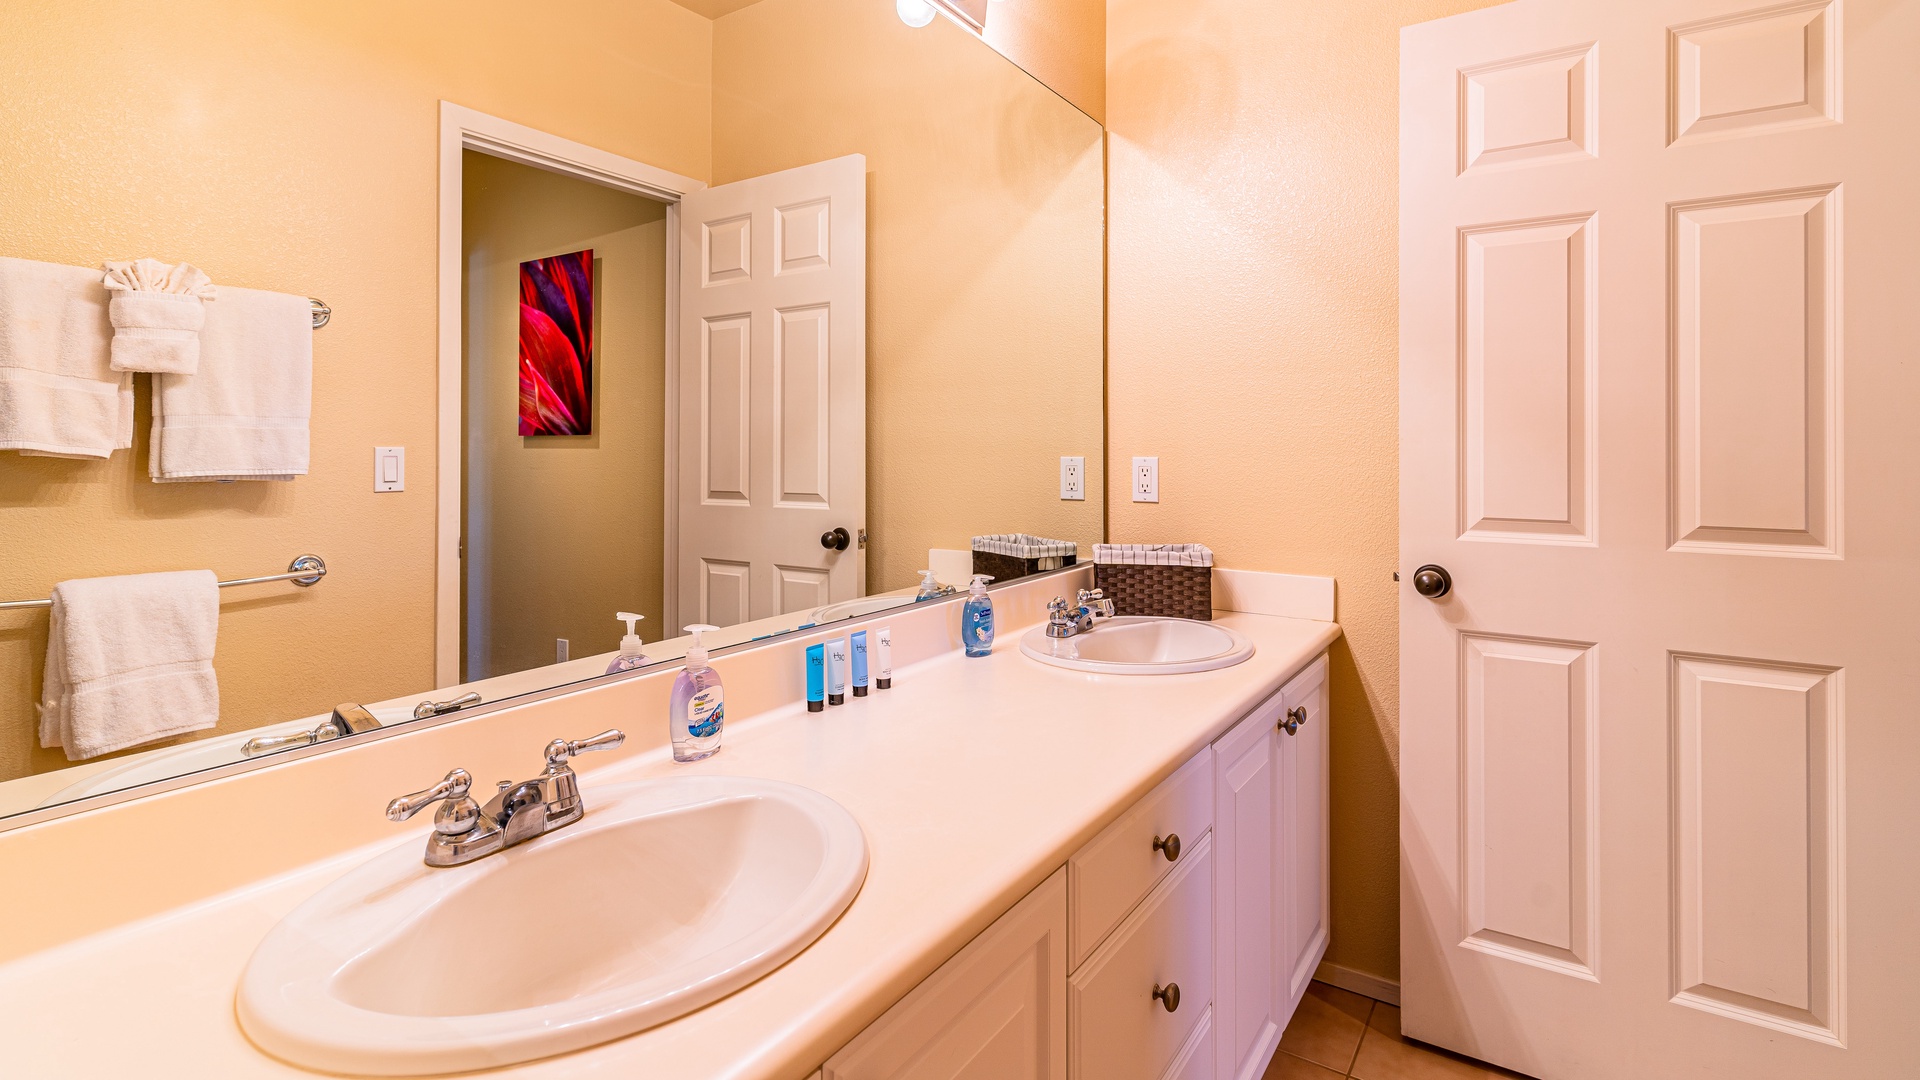 Kapolei Vacation Rentals, Coconut Plantation 1174-2 - The second guest bathroom located upstairs with a double vanity.